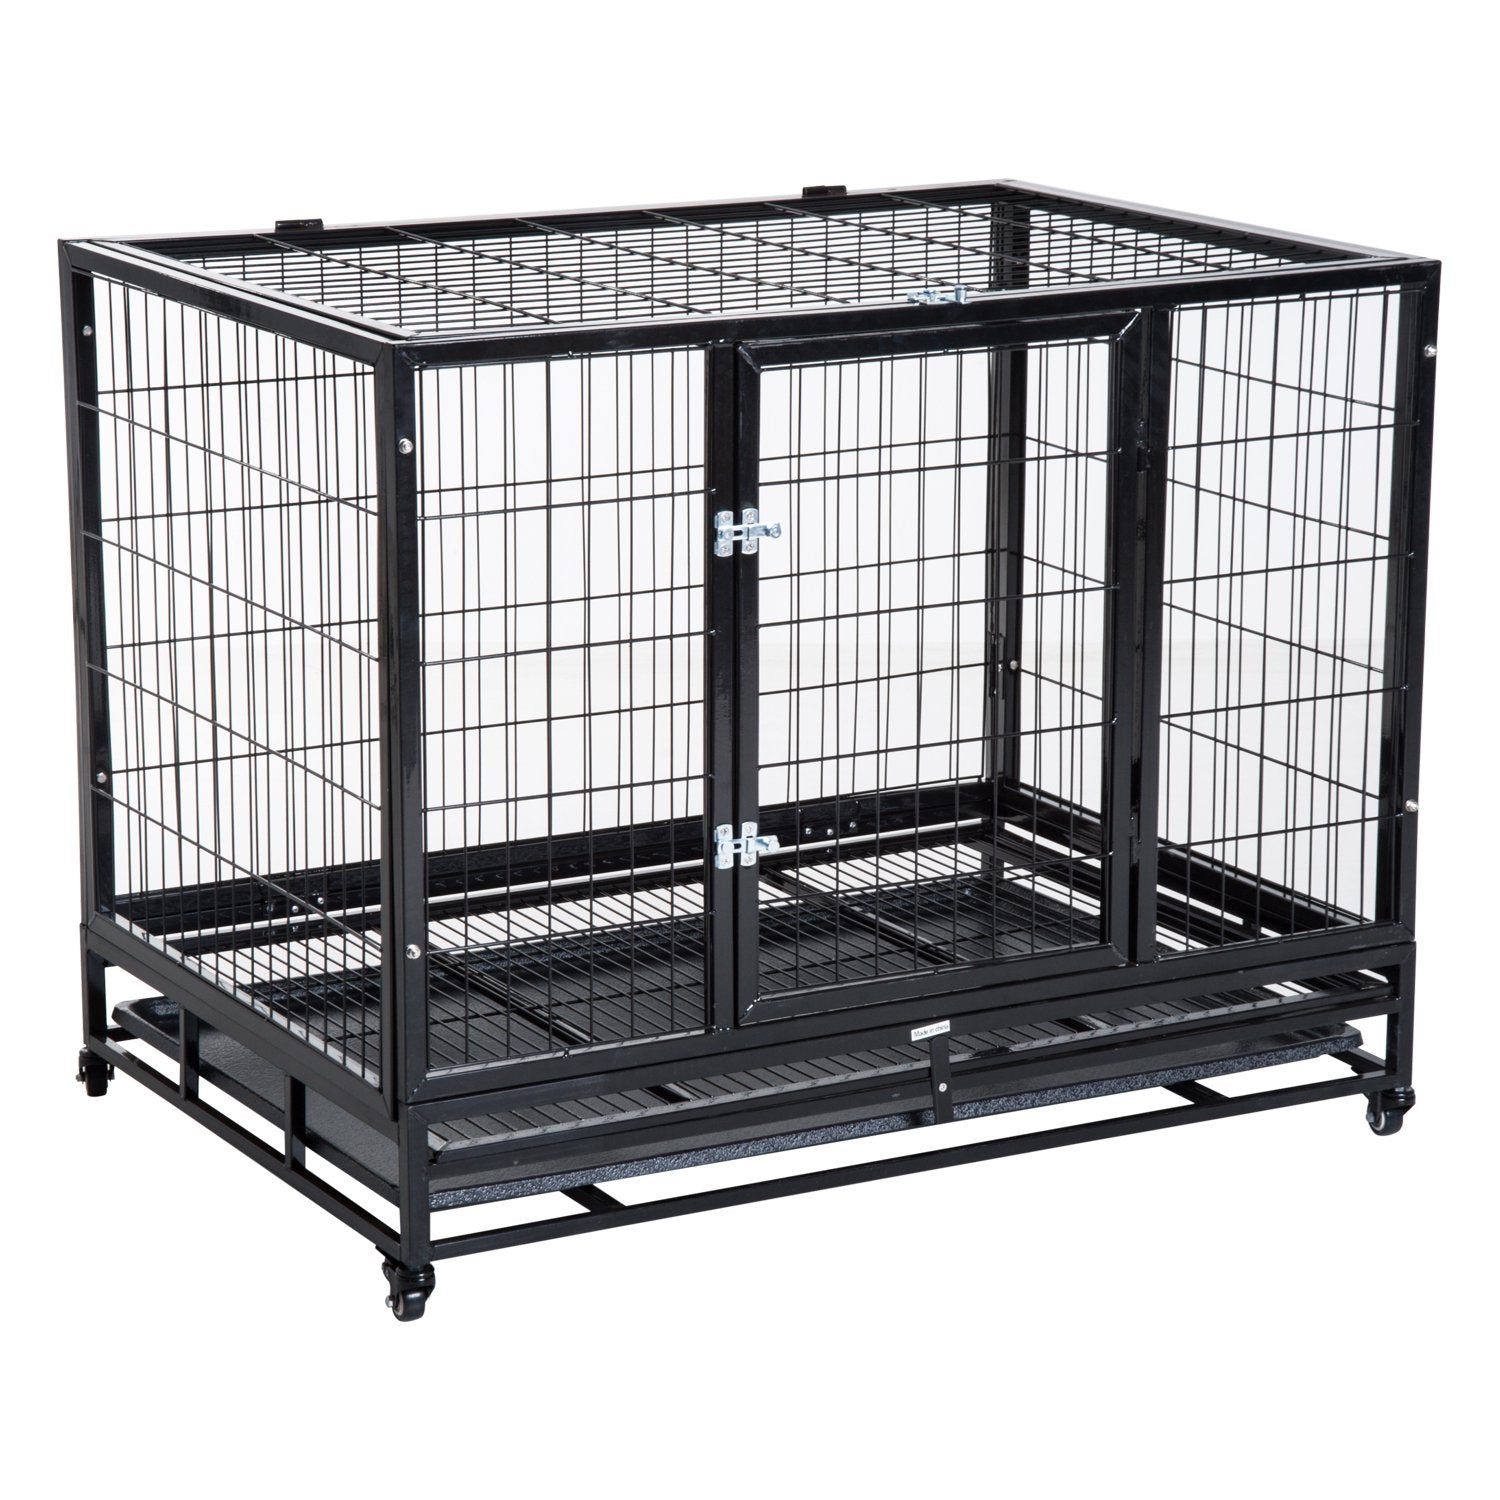 Metal Kennel Cage W/Wheels and Crate Tray, 109Lx76Wx87H cm